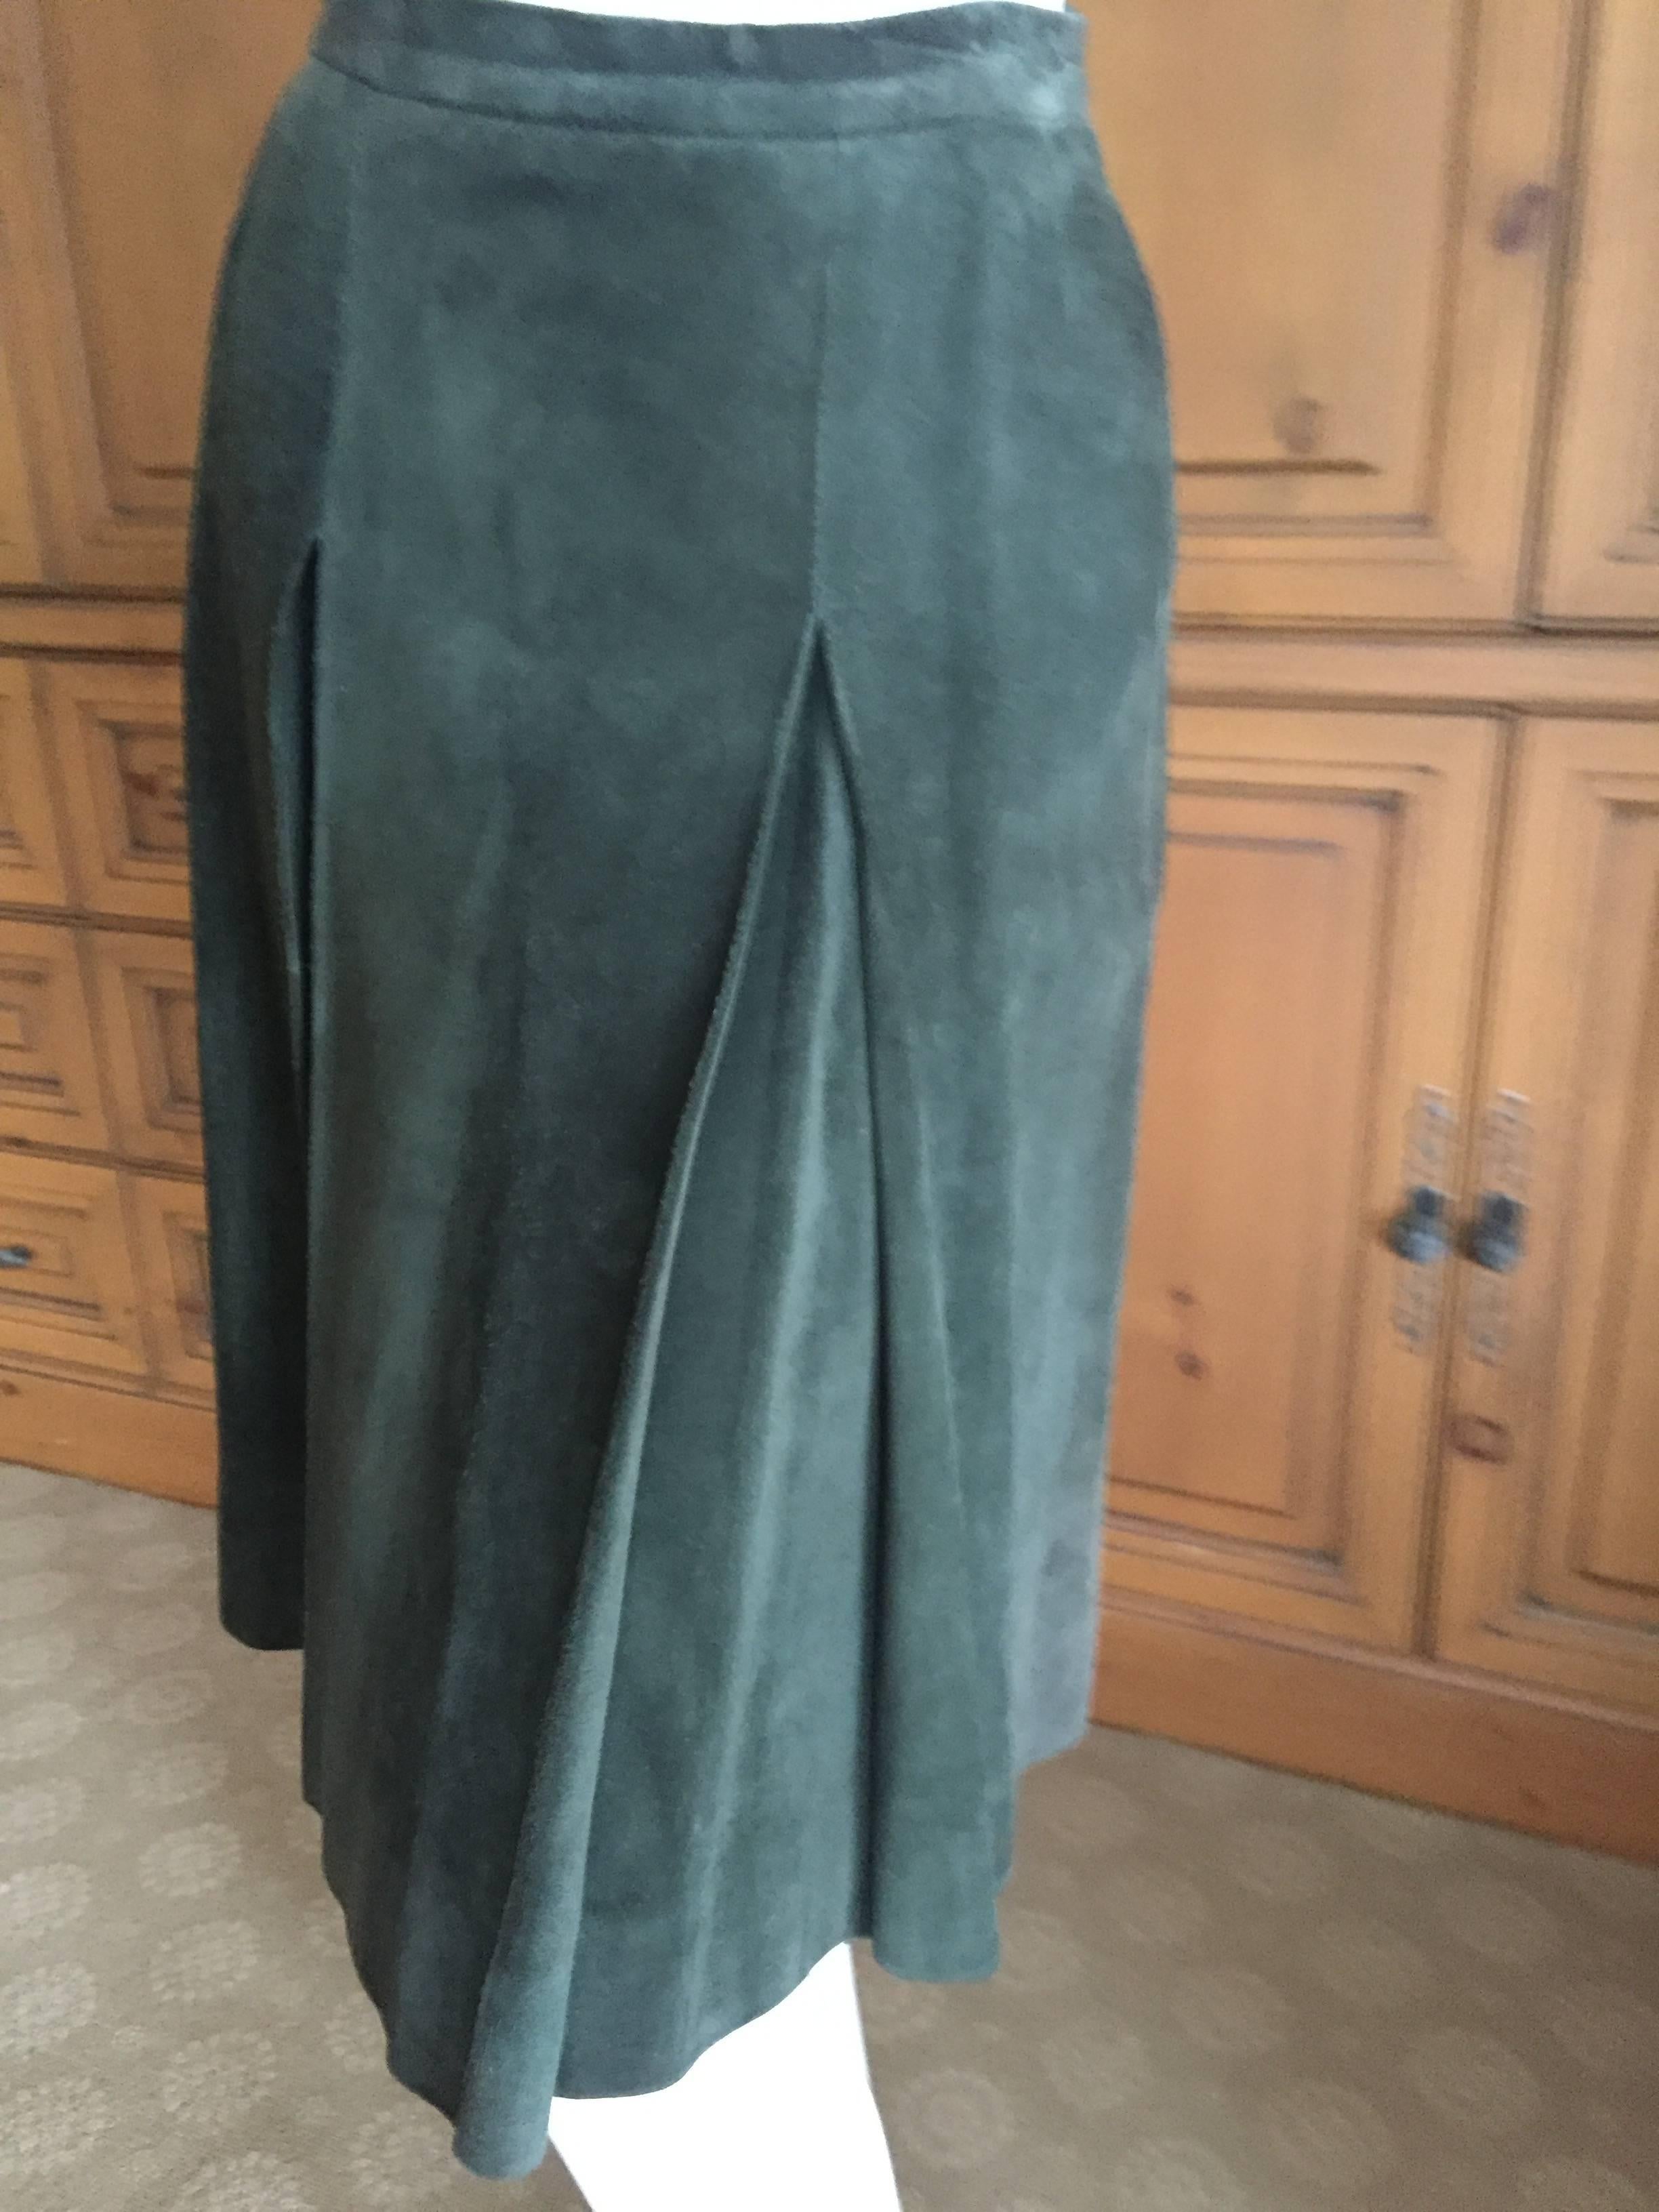 Women's Hermes Scarf Lined Green Suede Skirt Suit with